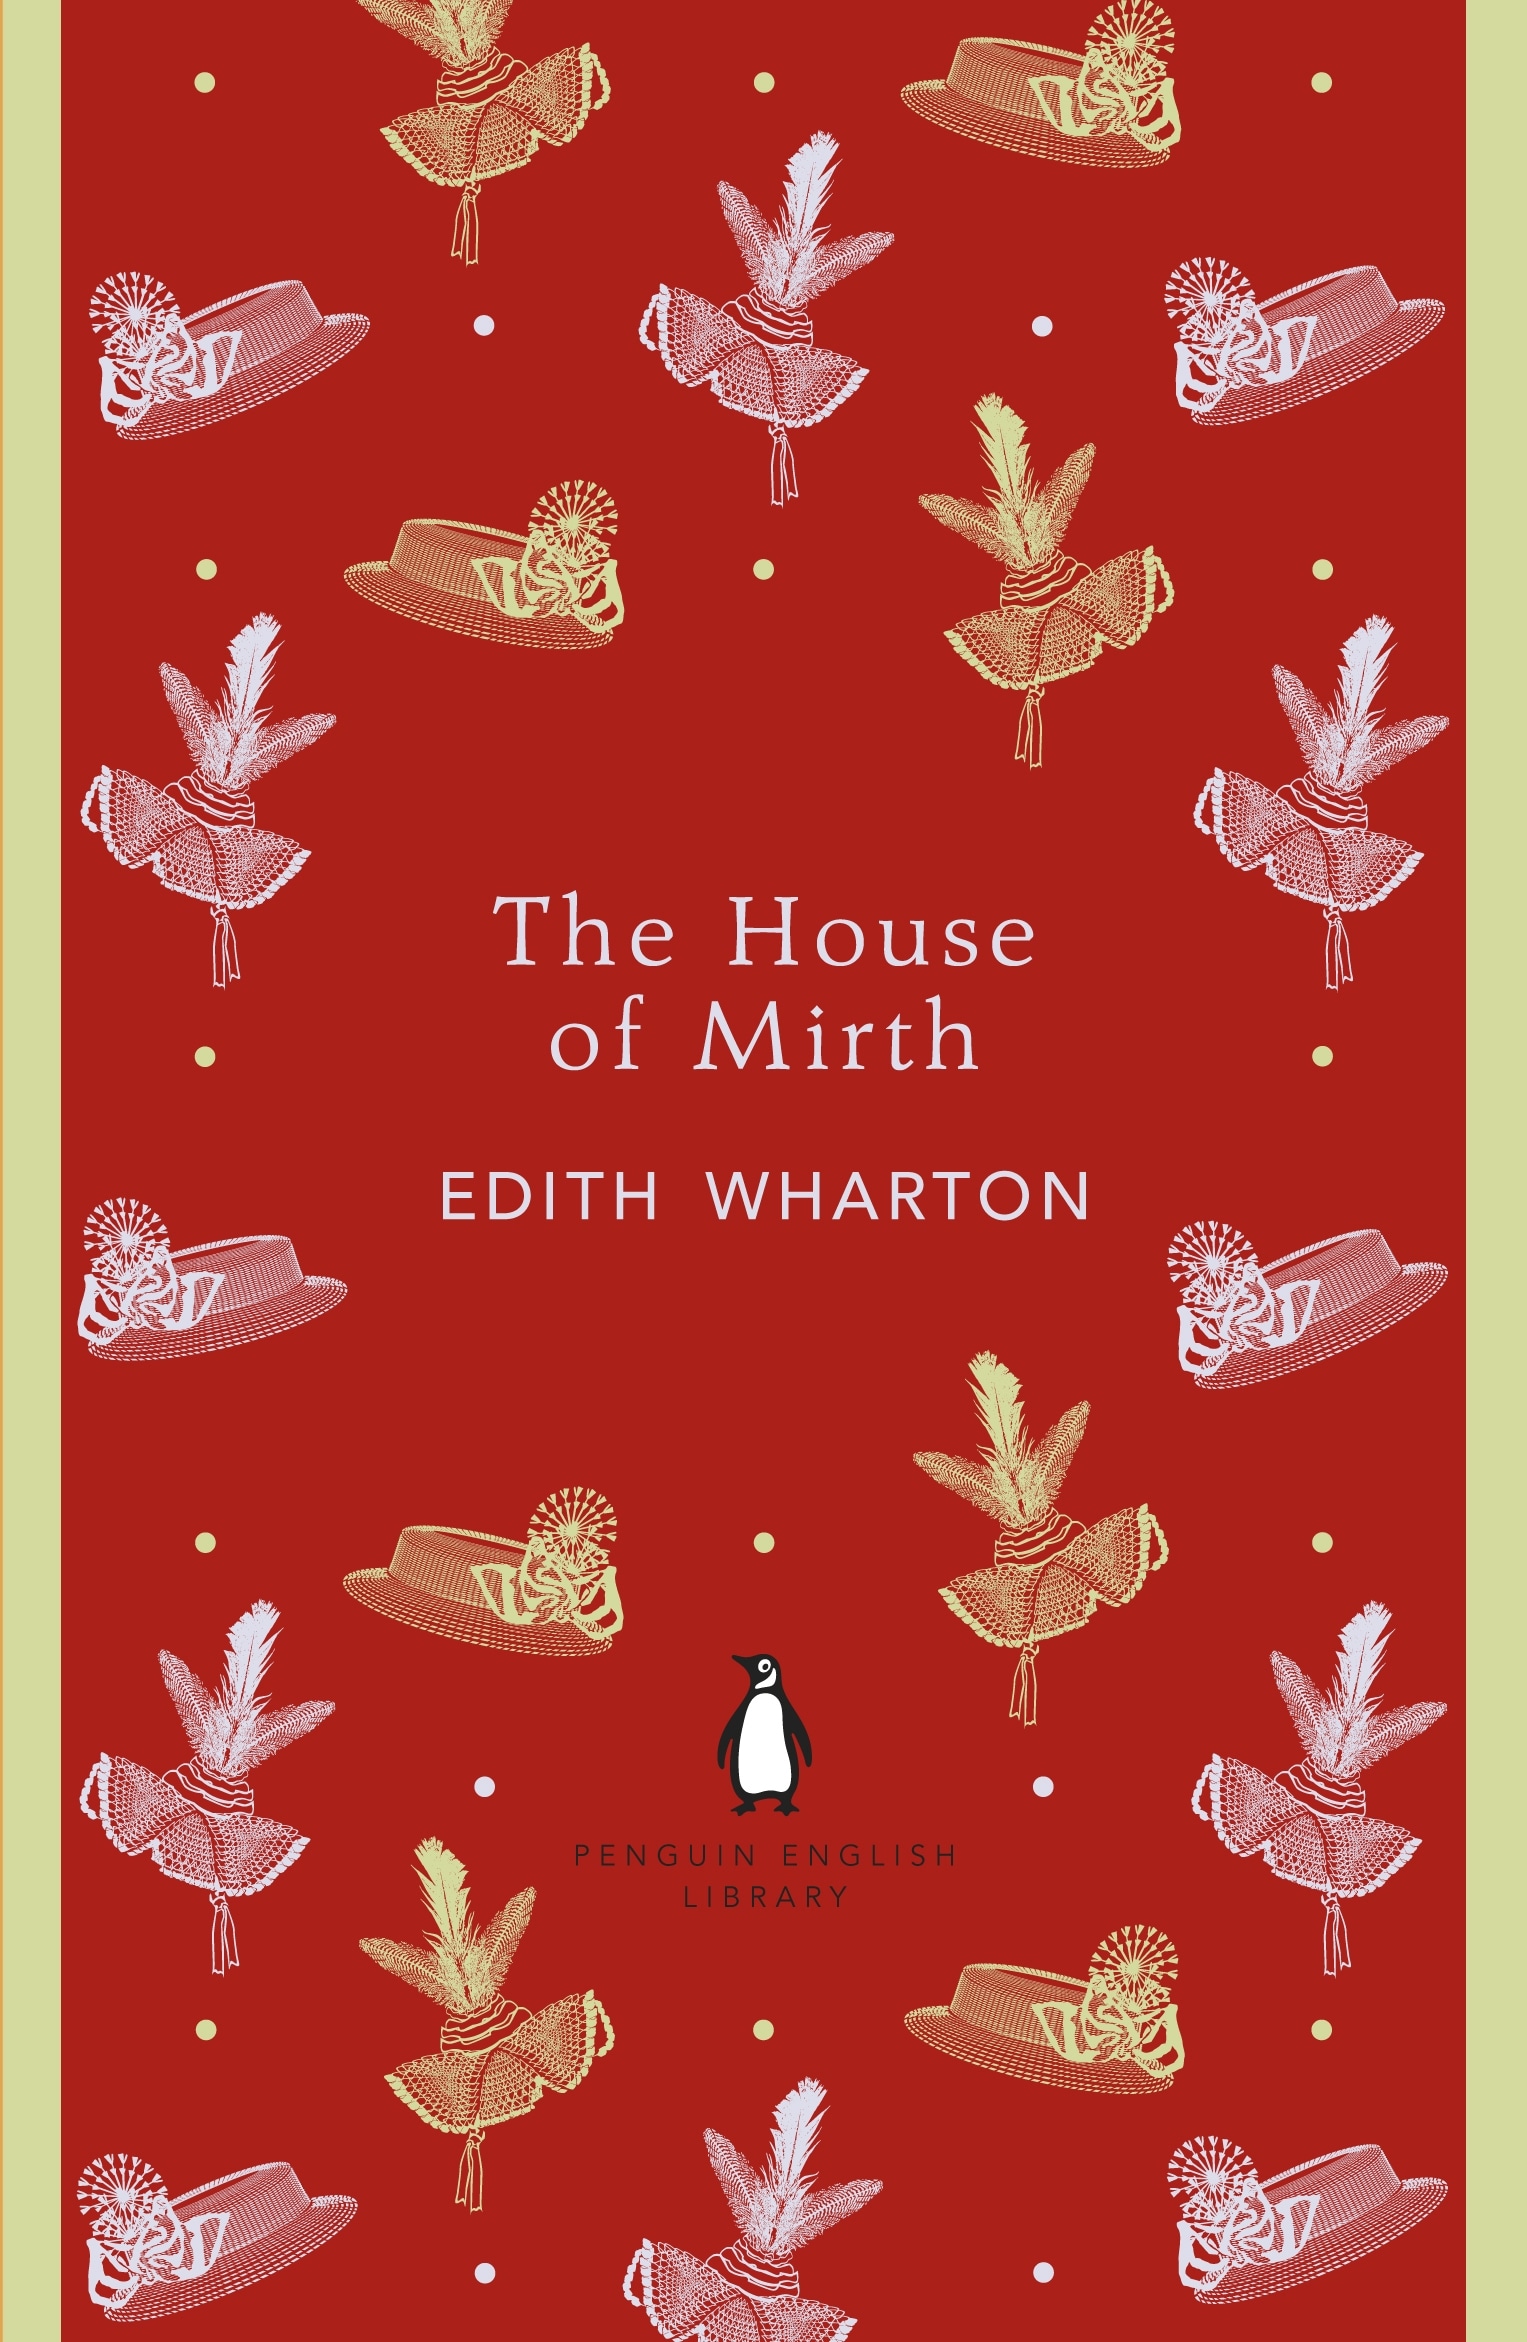 Book “The House of Mirth” by Edith Wharton — April 26, 2012